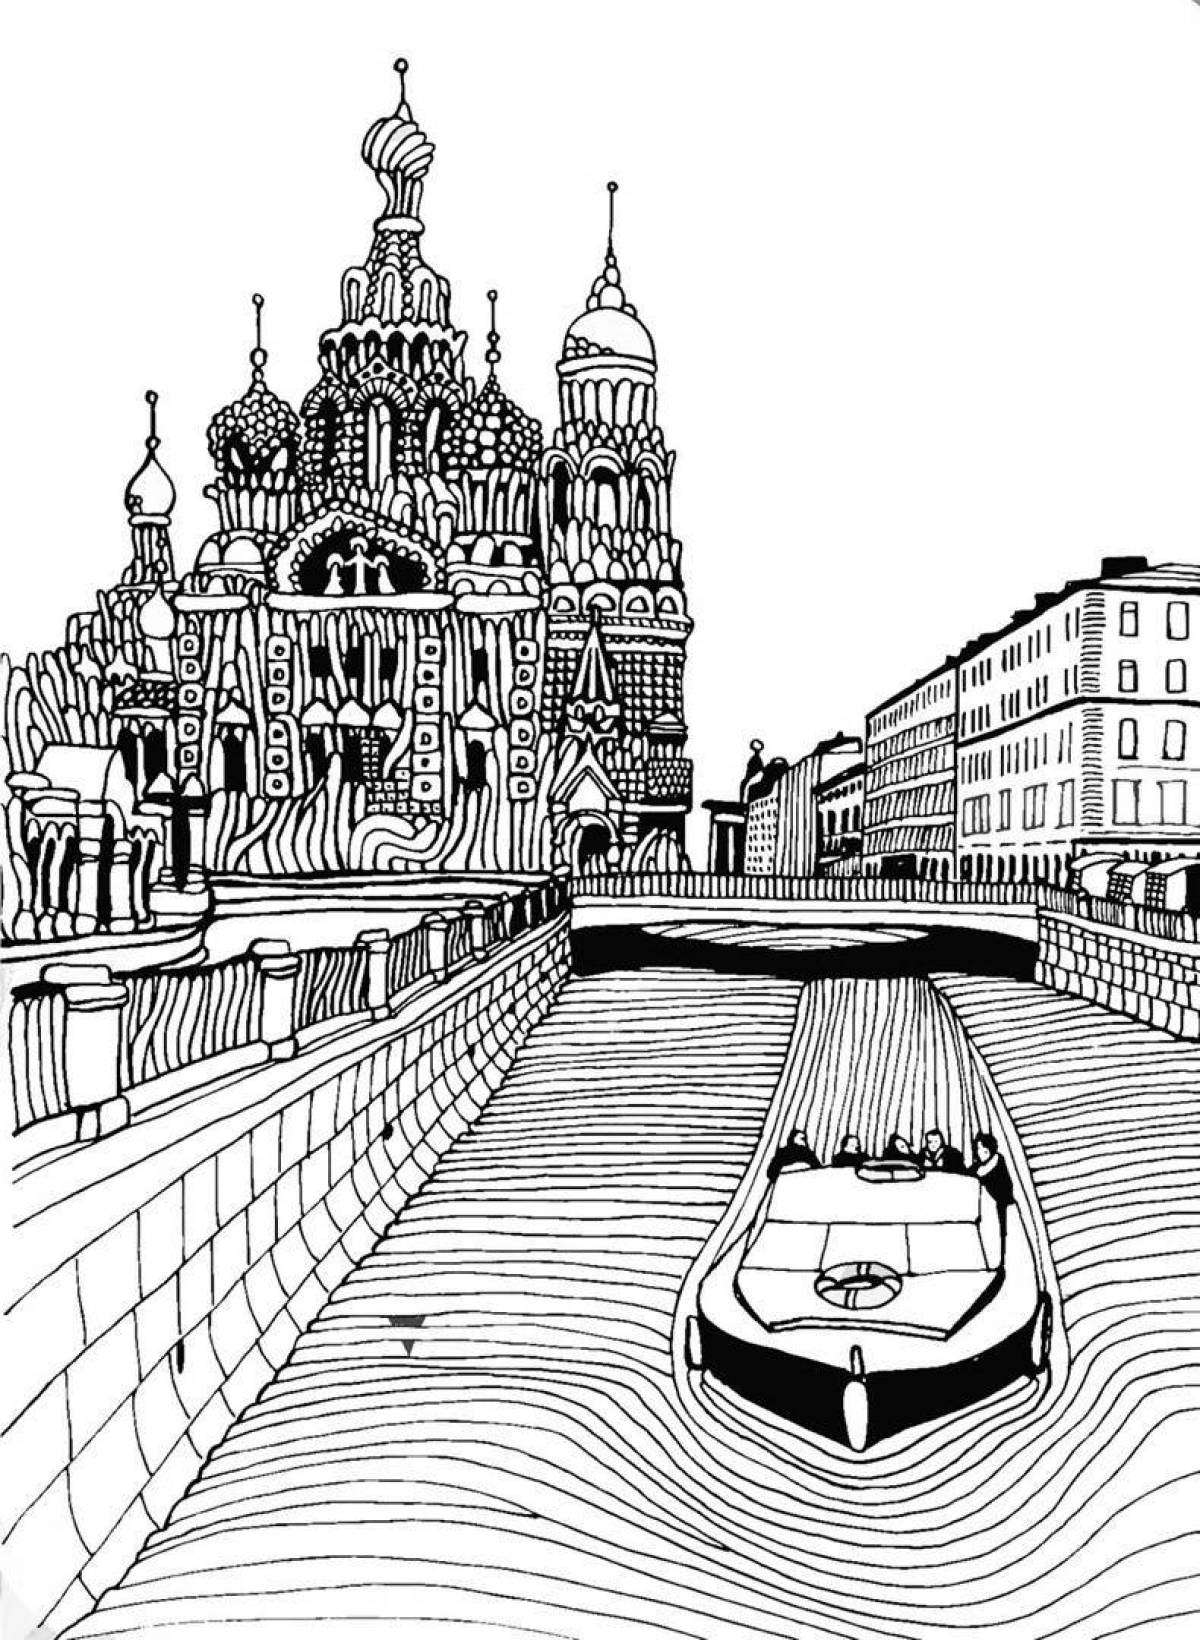 Coloring page sparkling petersburg